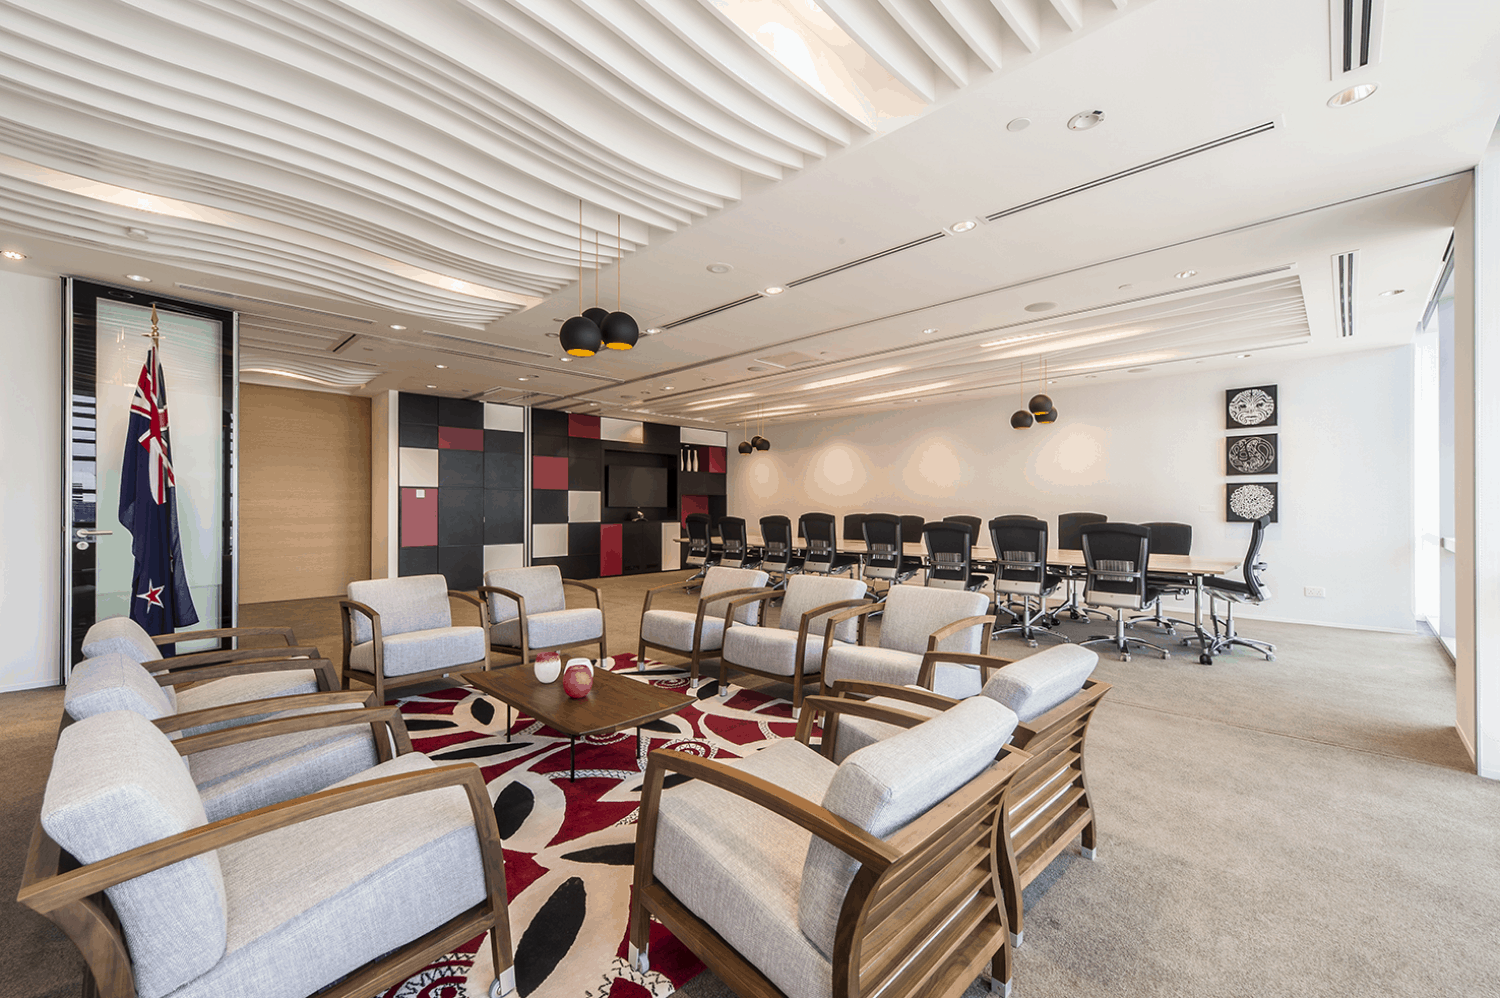 Ministry of Foreign Affairs and Trade office Singapore boardroom meeting room design